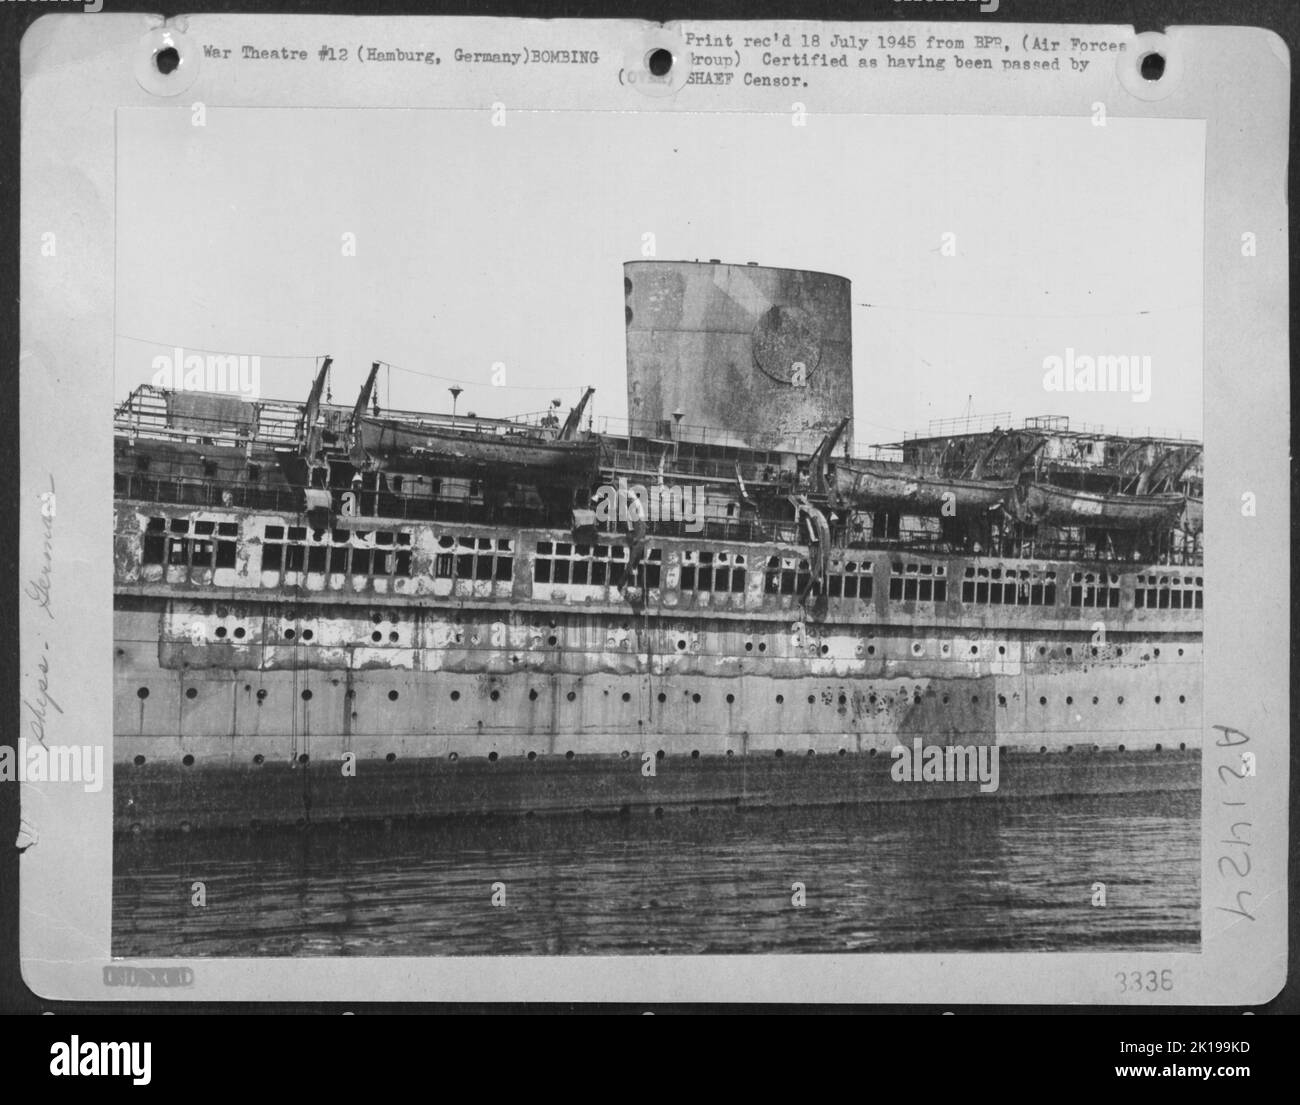 Hamburg Germany -- Namesake Of Robert Ley, The Nazi Labor Camp Front Leader Now A Prisoner Of The Allied Armies, Is The 28,000-Ton Liner Built In 1938 For The 'Strength Through Joy' Movement Cruises. It Was Gutted By Fire As A Result Of One Of The Attack Stock Photo